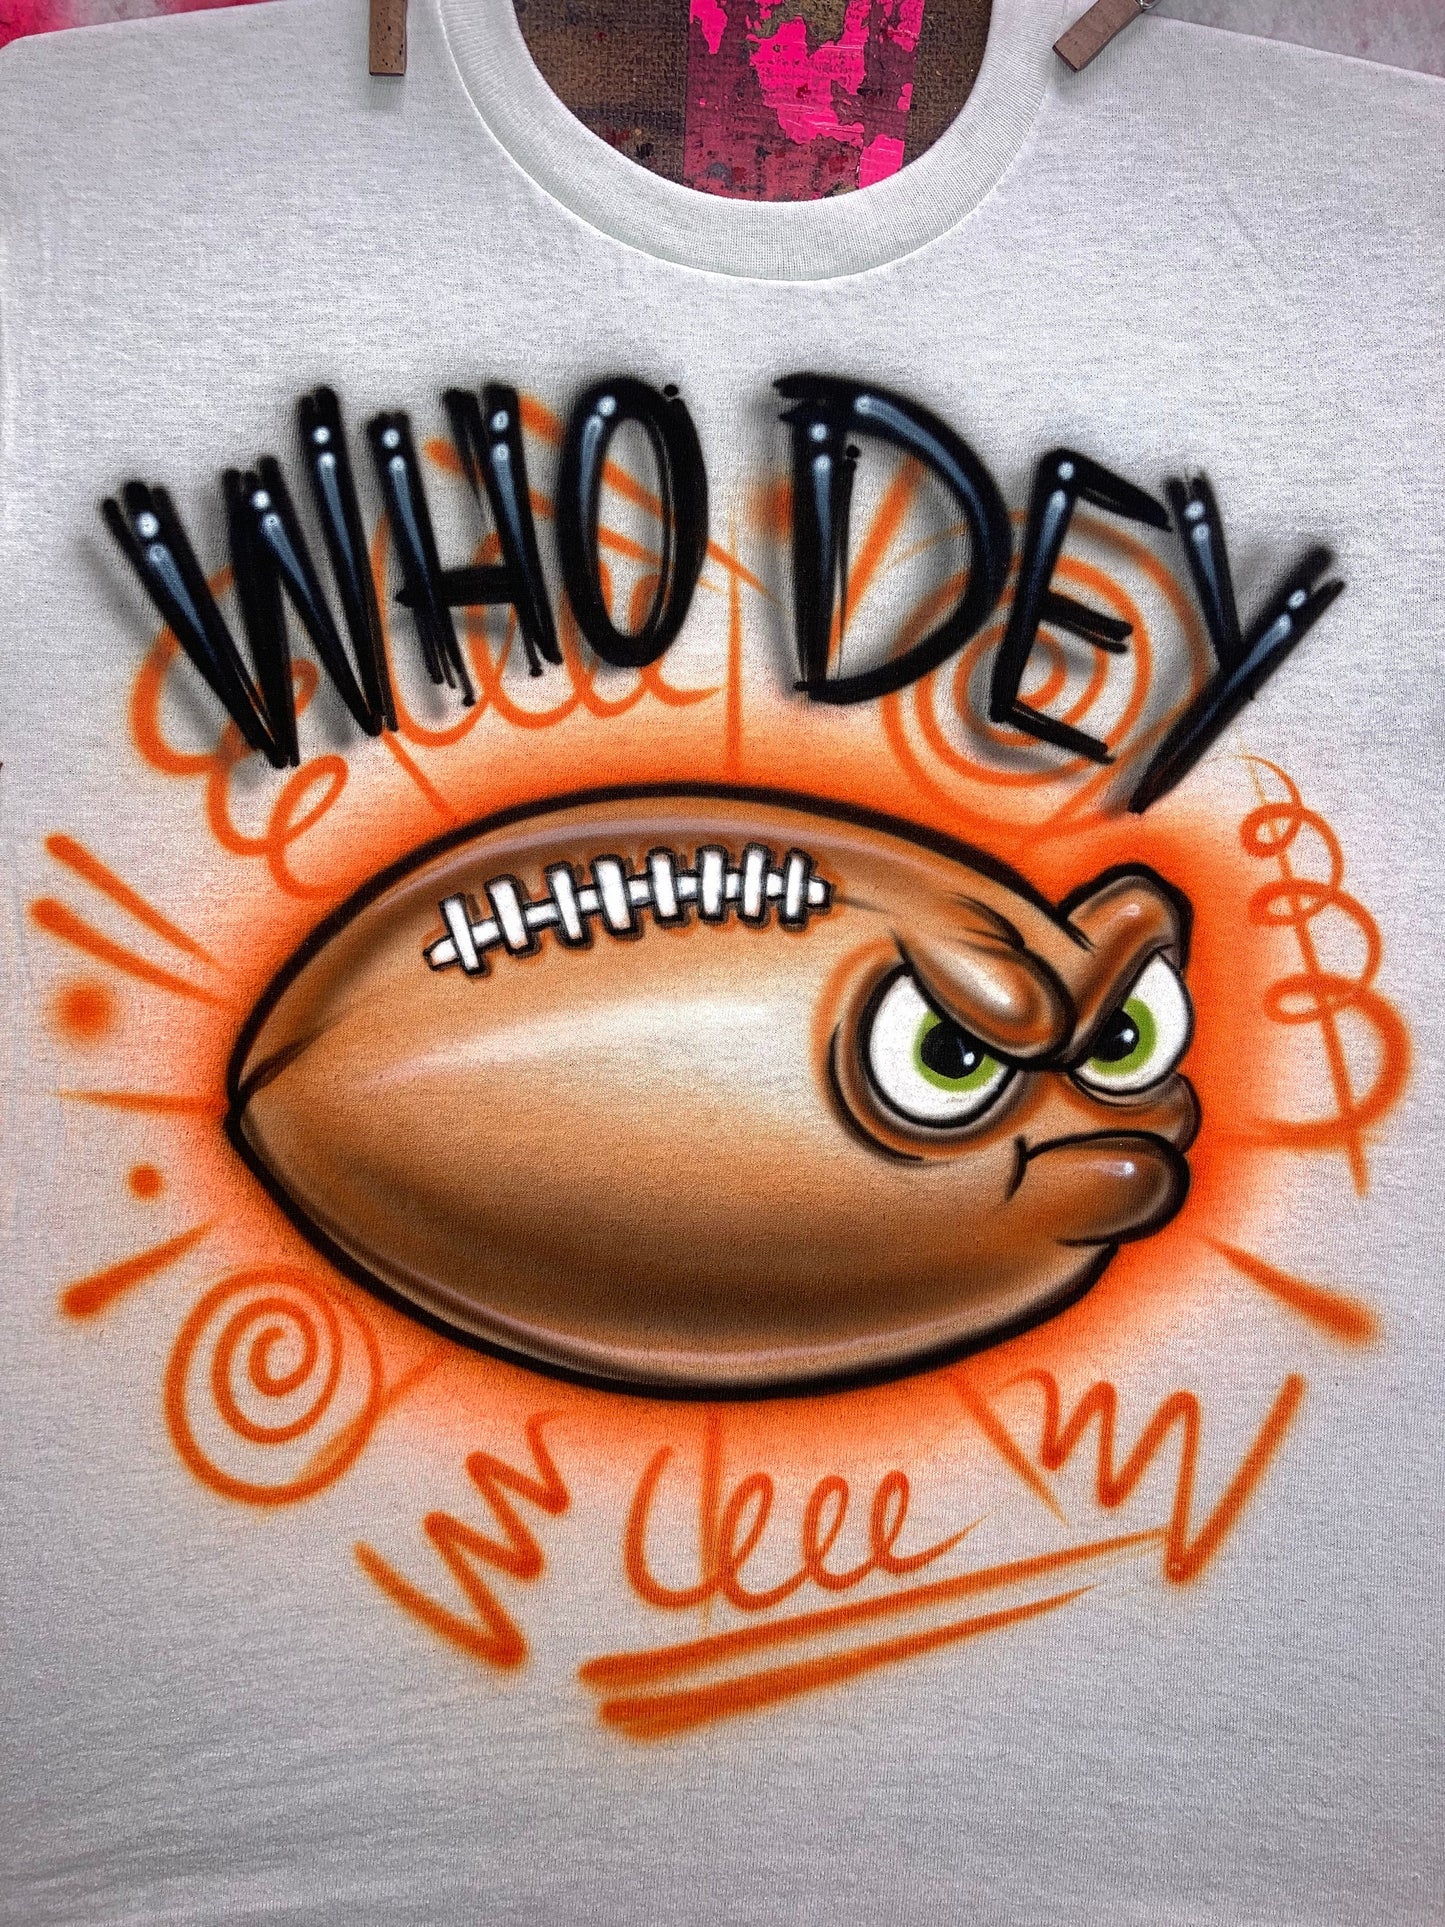 Airbrush T-shirt * Football * Your Name * Your slogan * Personalize * Custom